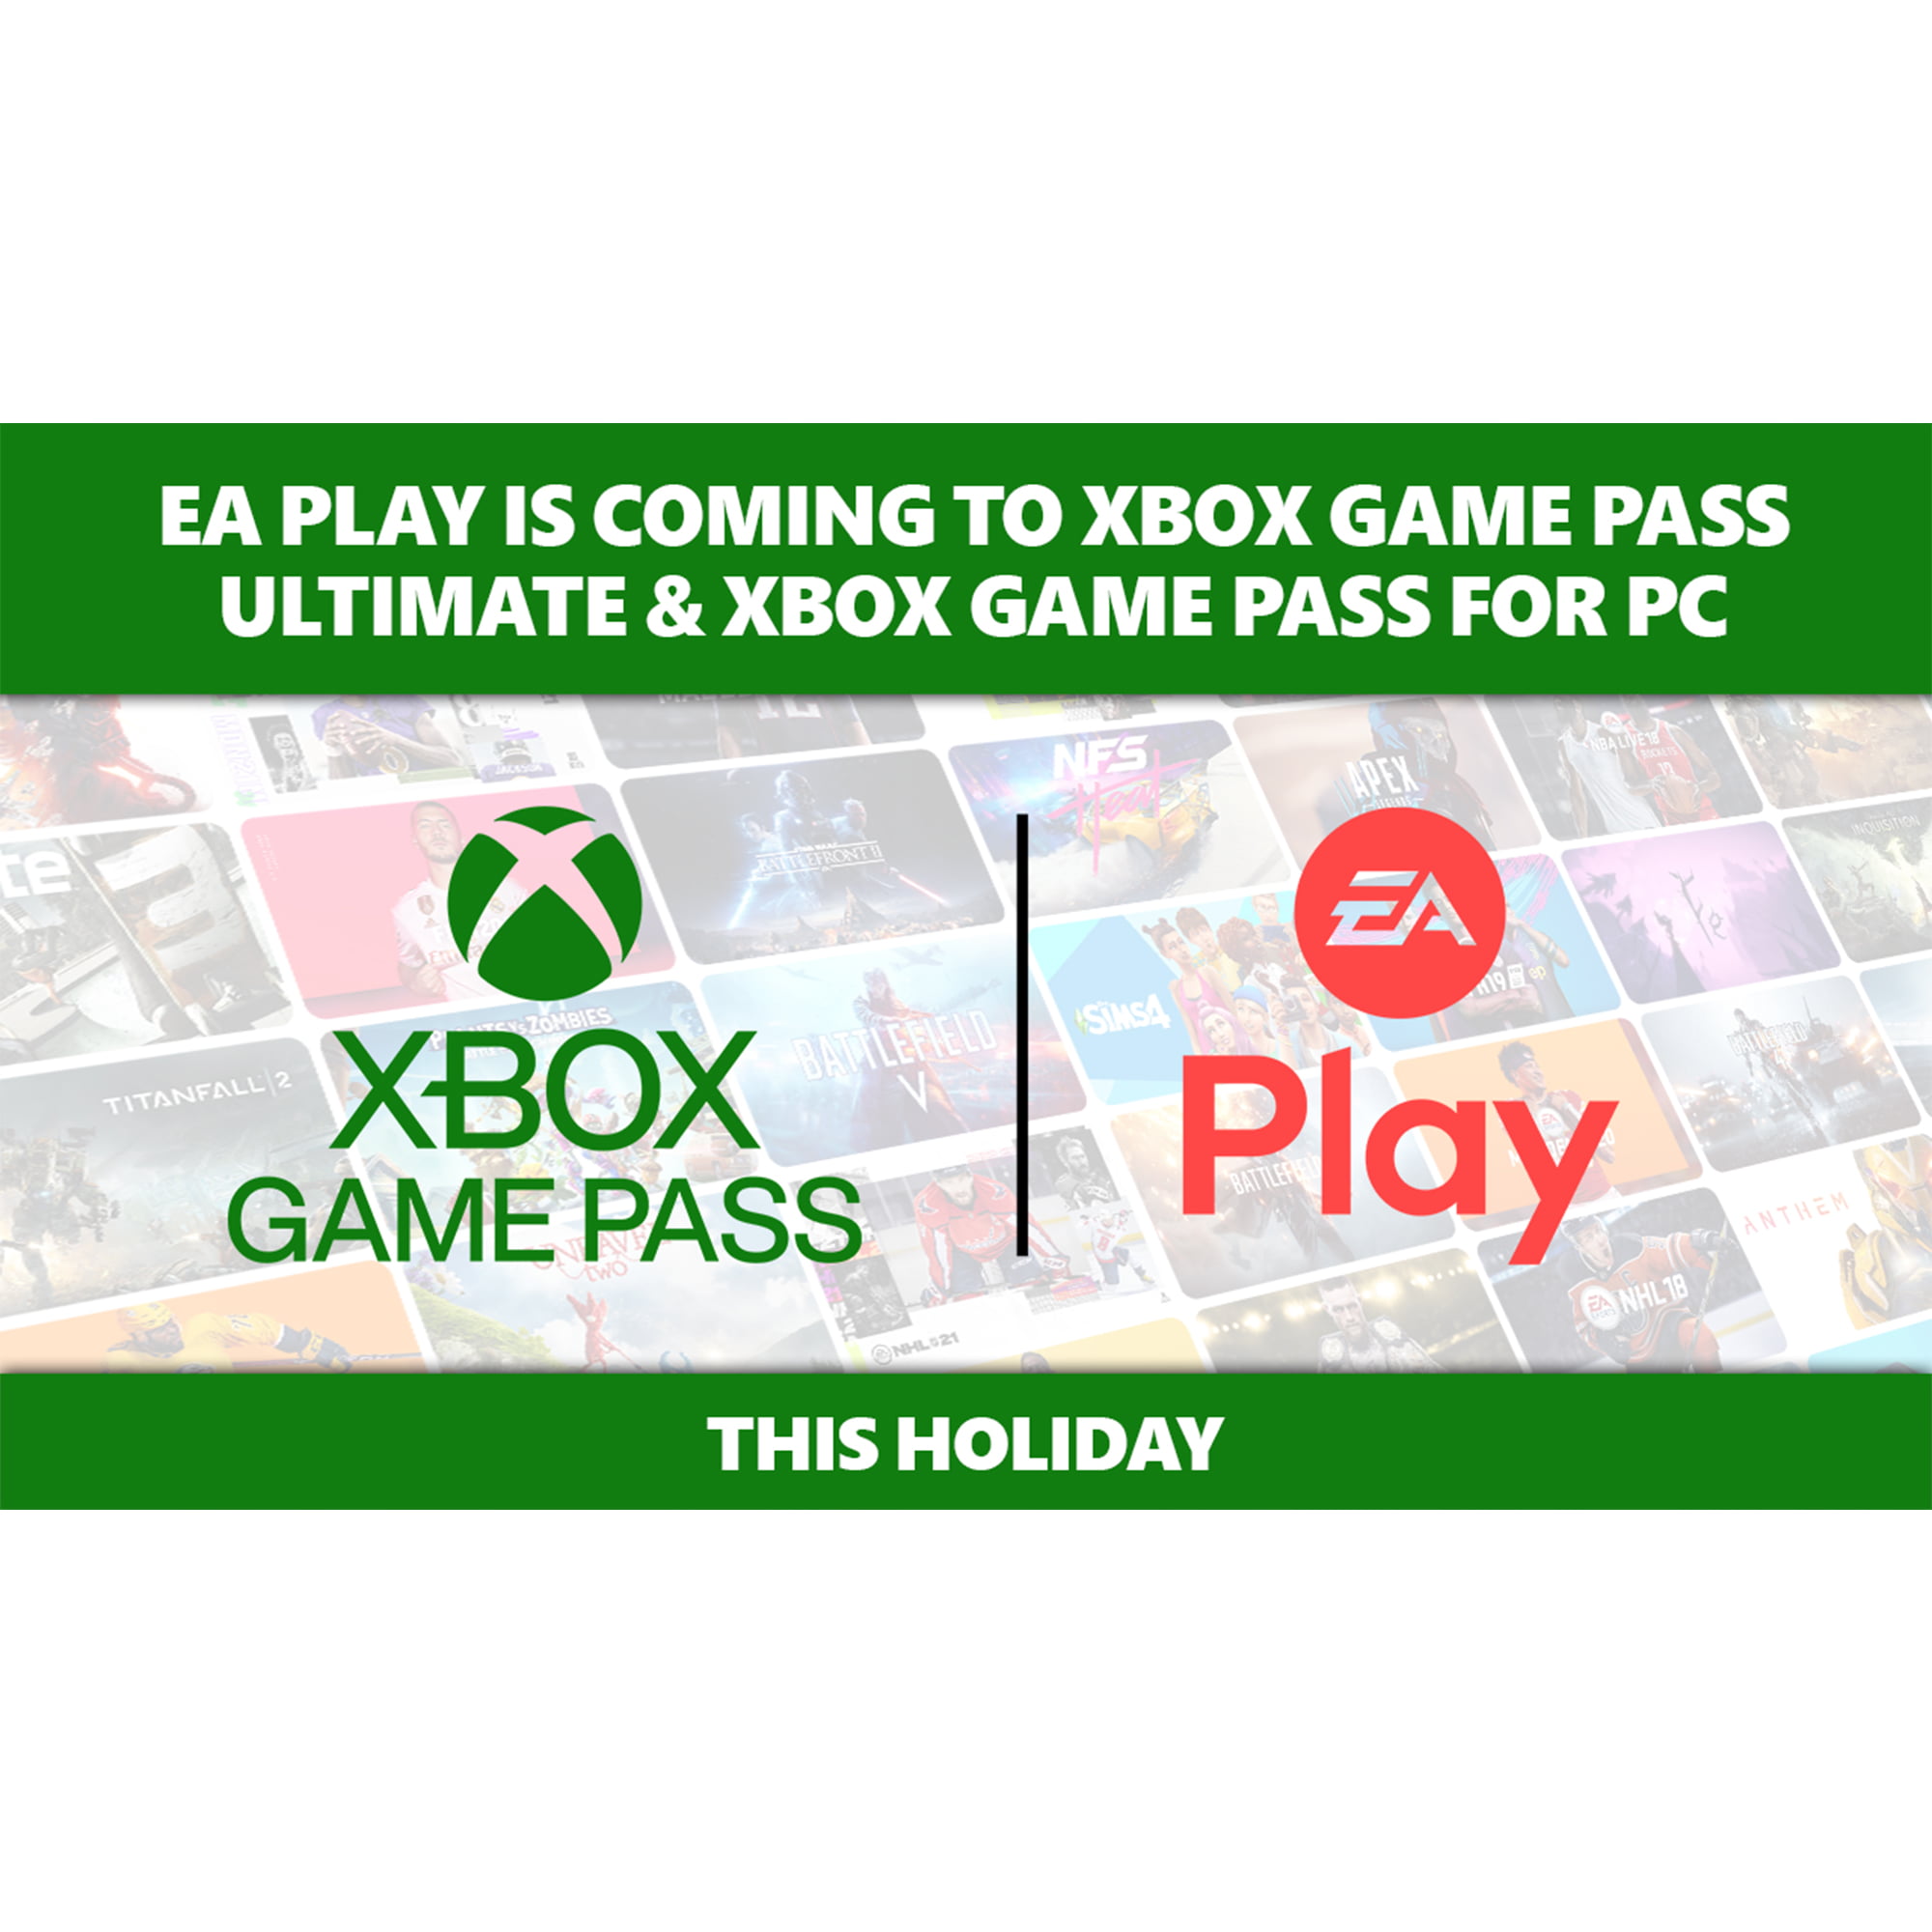 xbox game pass ultimate 12 month membership